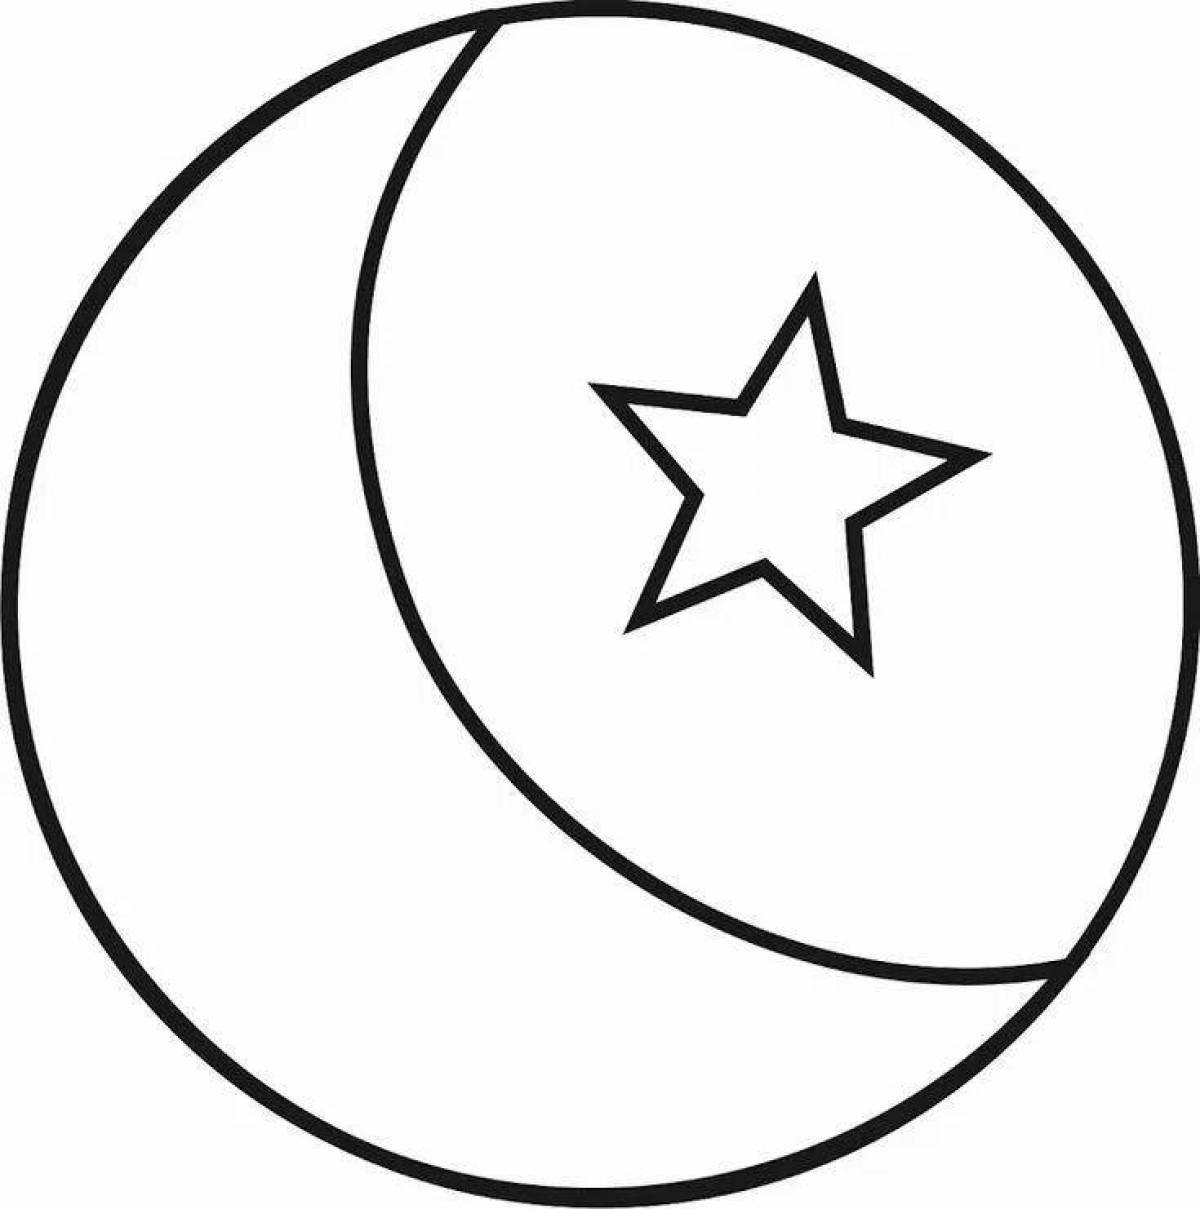 Awesome moon and stars coloring book